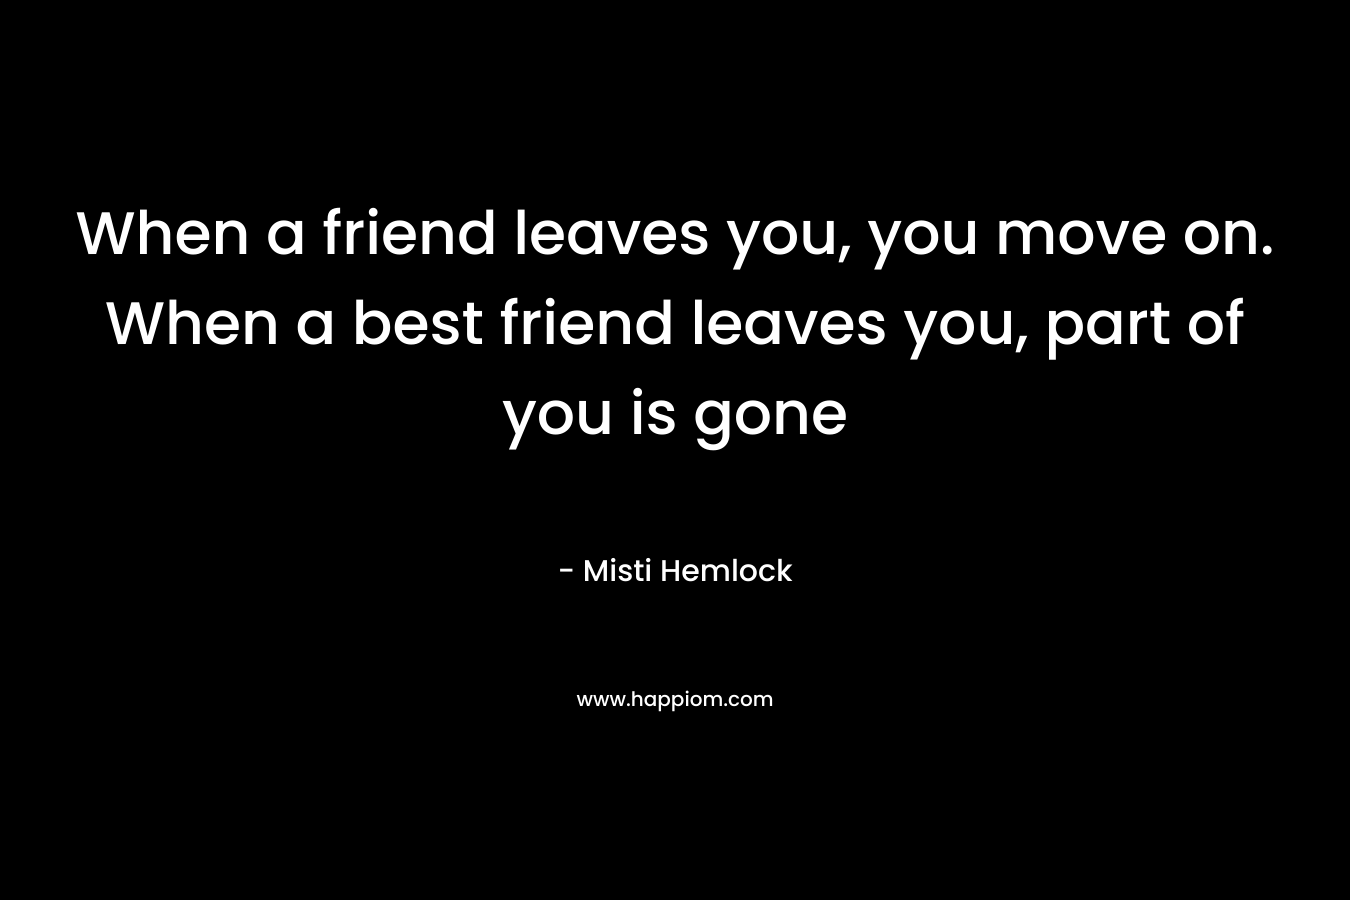 When a friend leaves you, you move on. When a best friend leaves you, part of you is gone